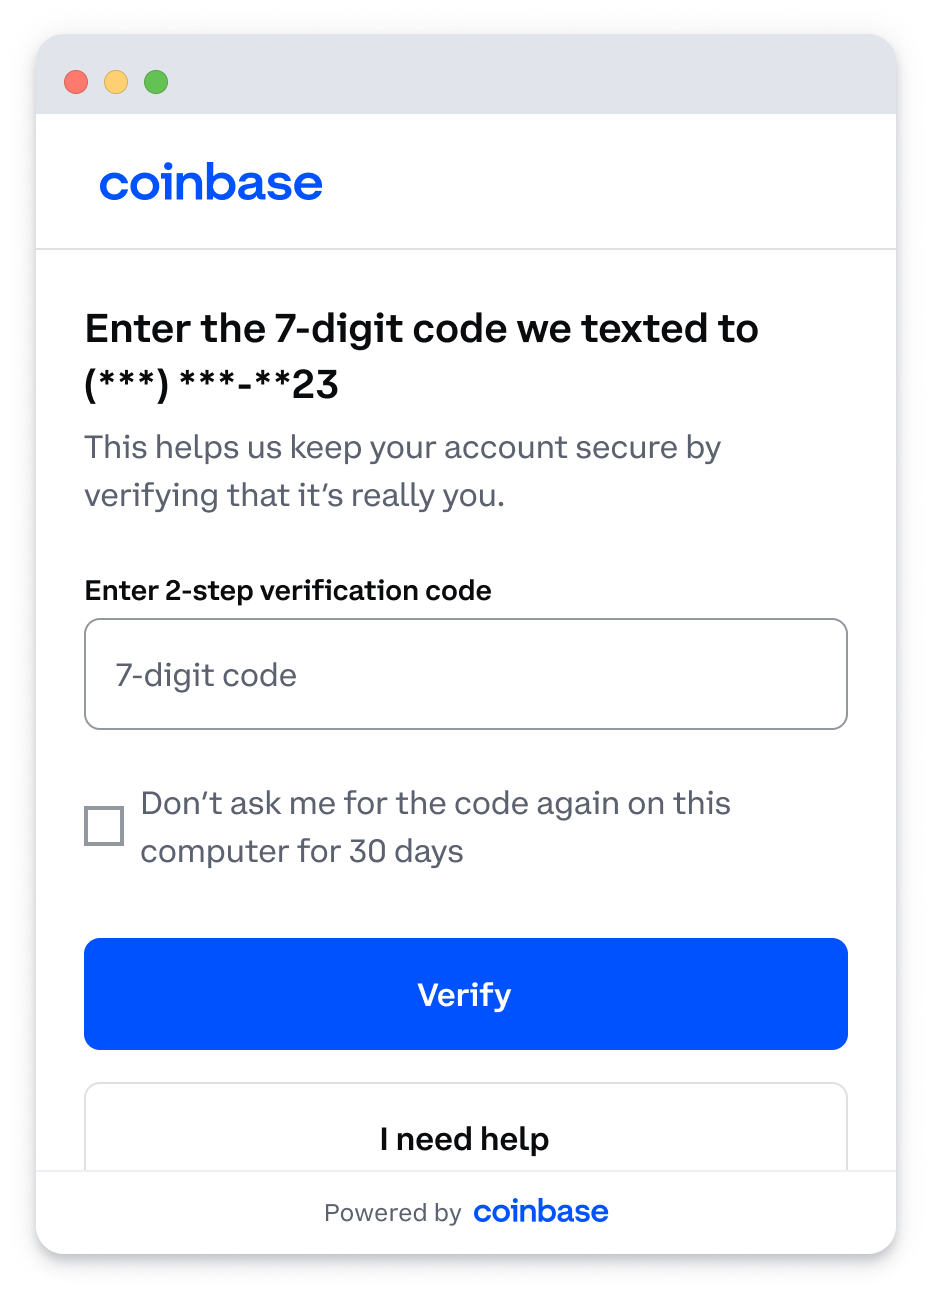 For 2FA enter the 7-digit code. Check the box to avoid being prompted again for 30 days.